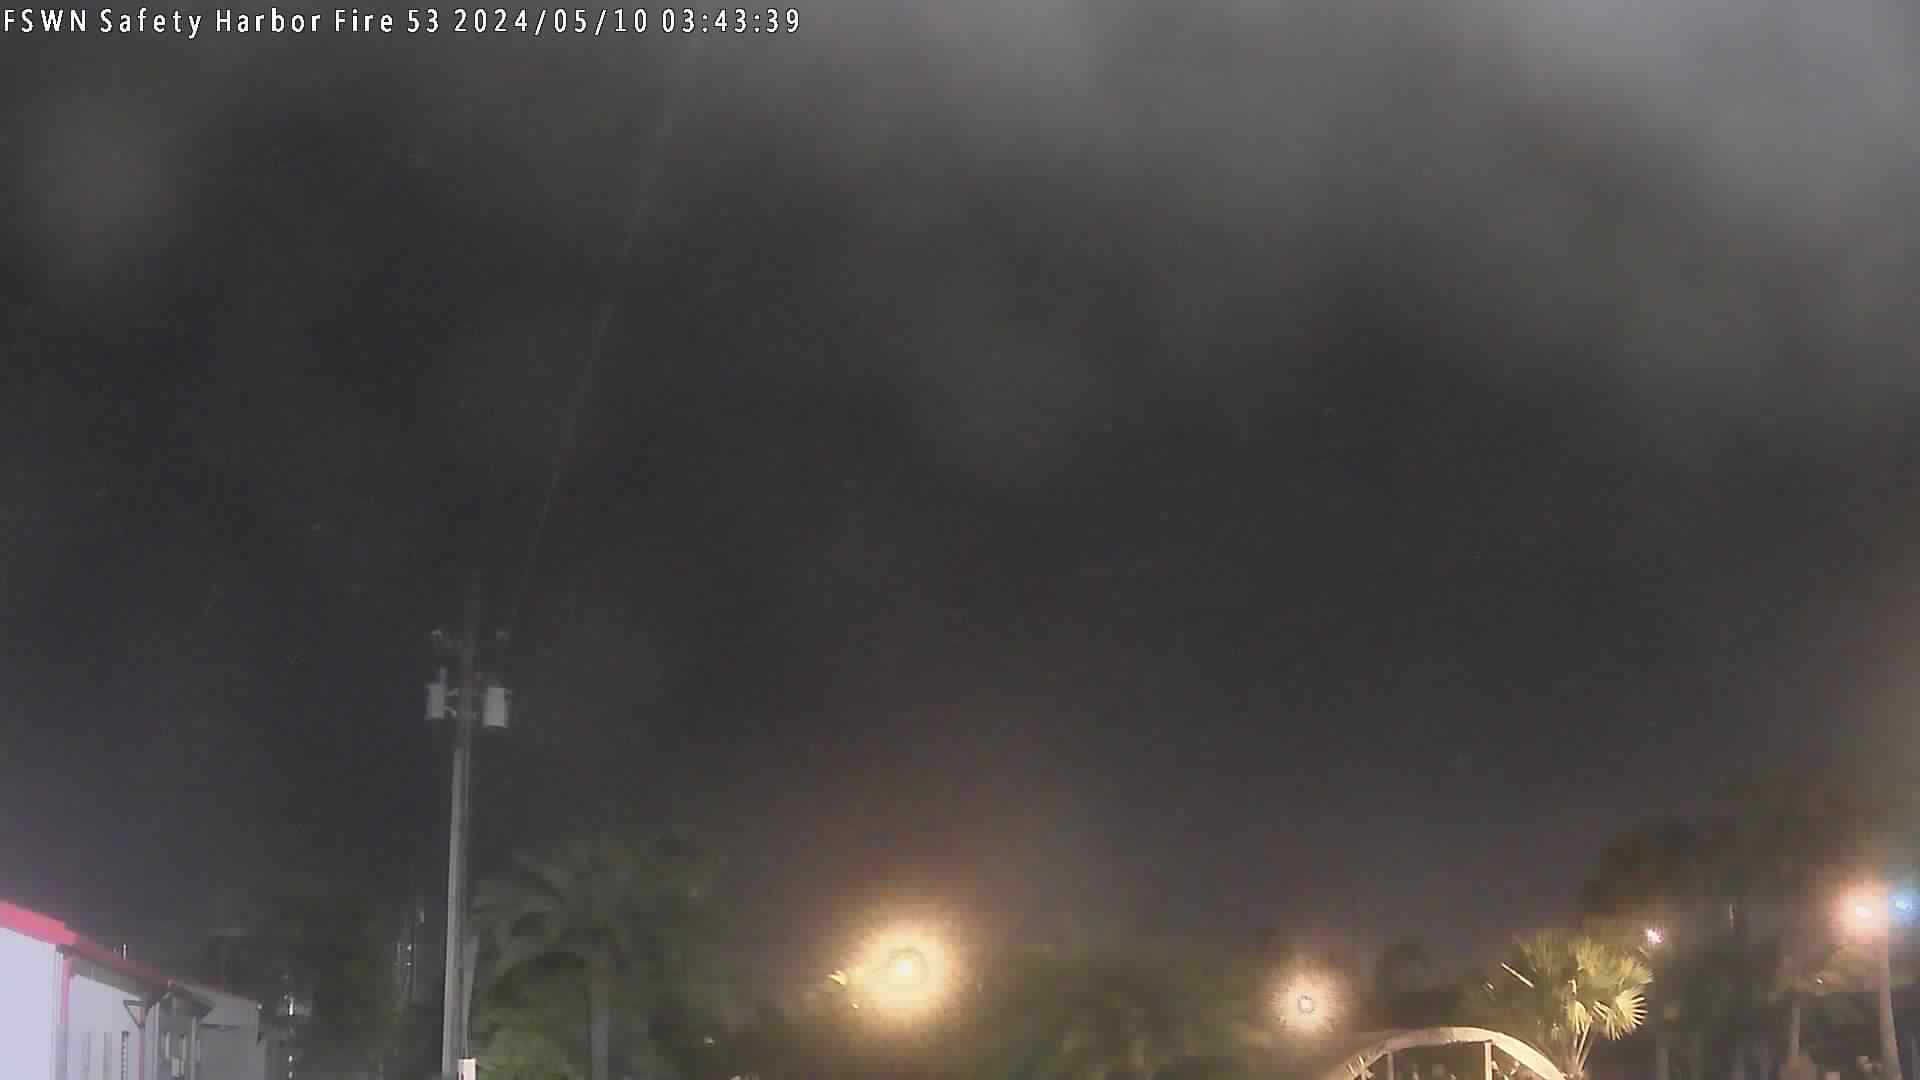  WeatherSTEM Cloud Camera FSWNSHFire53 in Pinellas County, Florida FL at FSWN Safety Harbor Fire Department 53